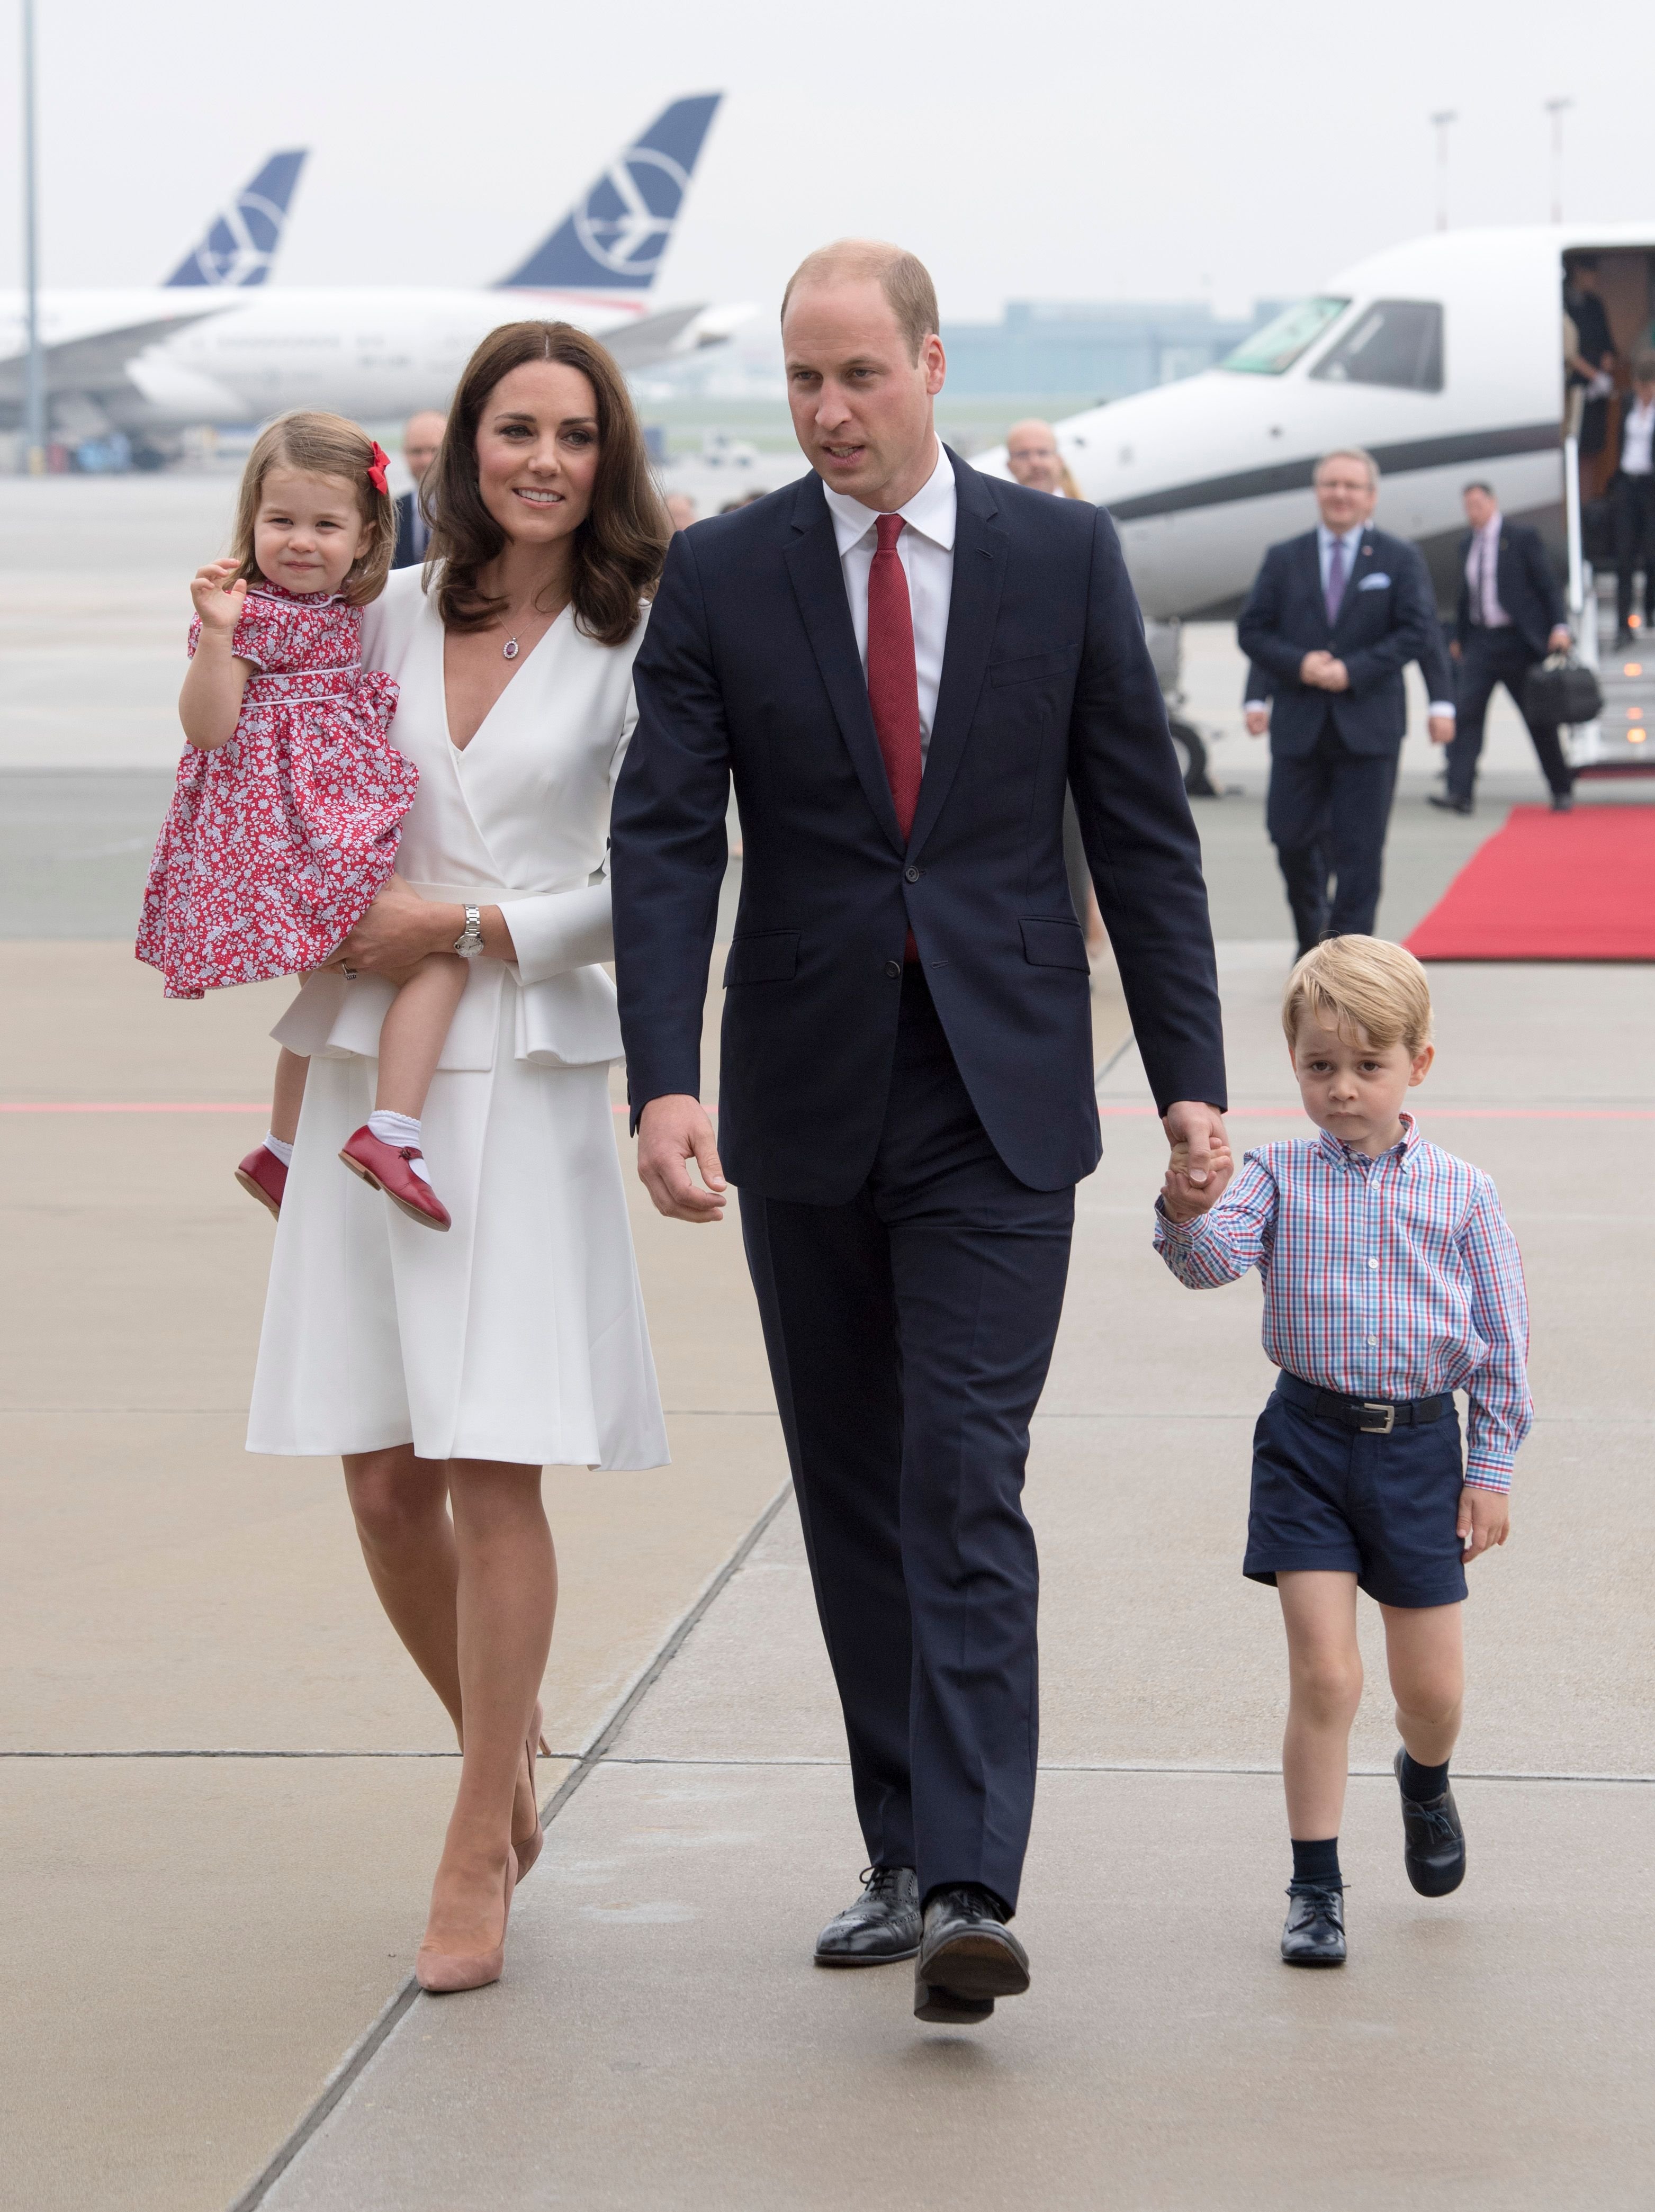 Prince William, Kate Middleton with their children Prince George and Princess Charlotte arrive at Warsaw airport to start a 3 day tour on July 17, 2017 in Warsaw, Poland | Photo: Getty Images